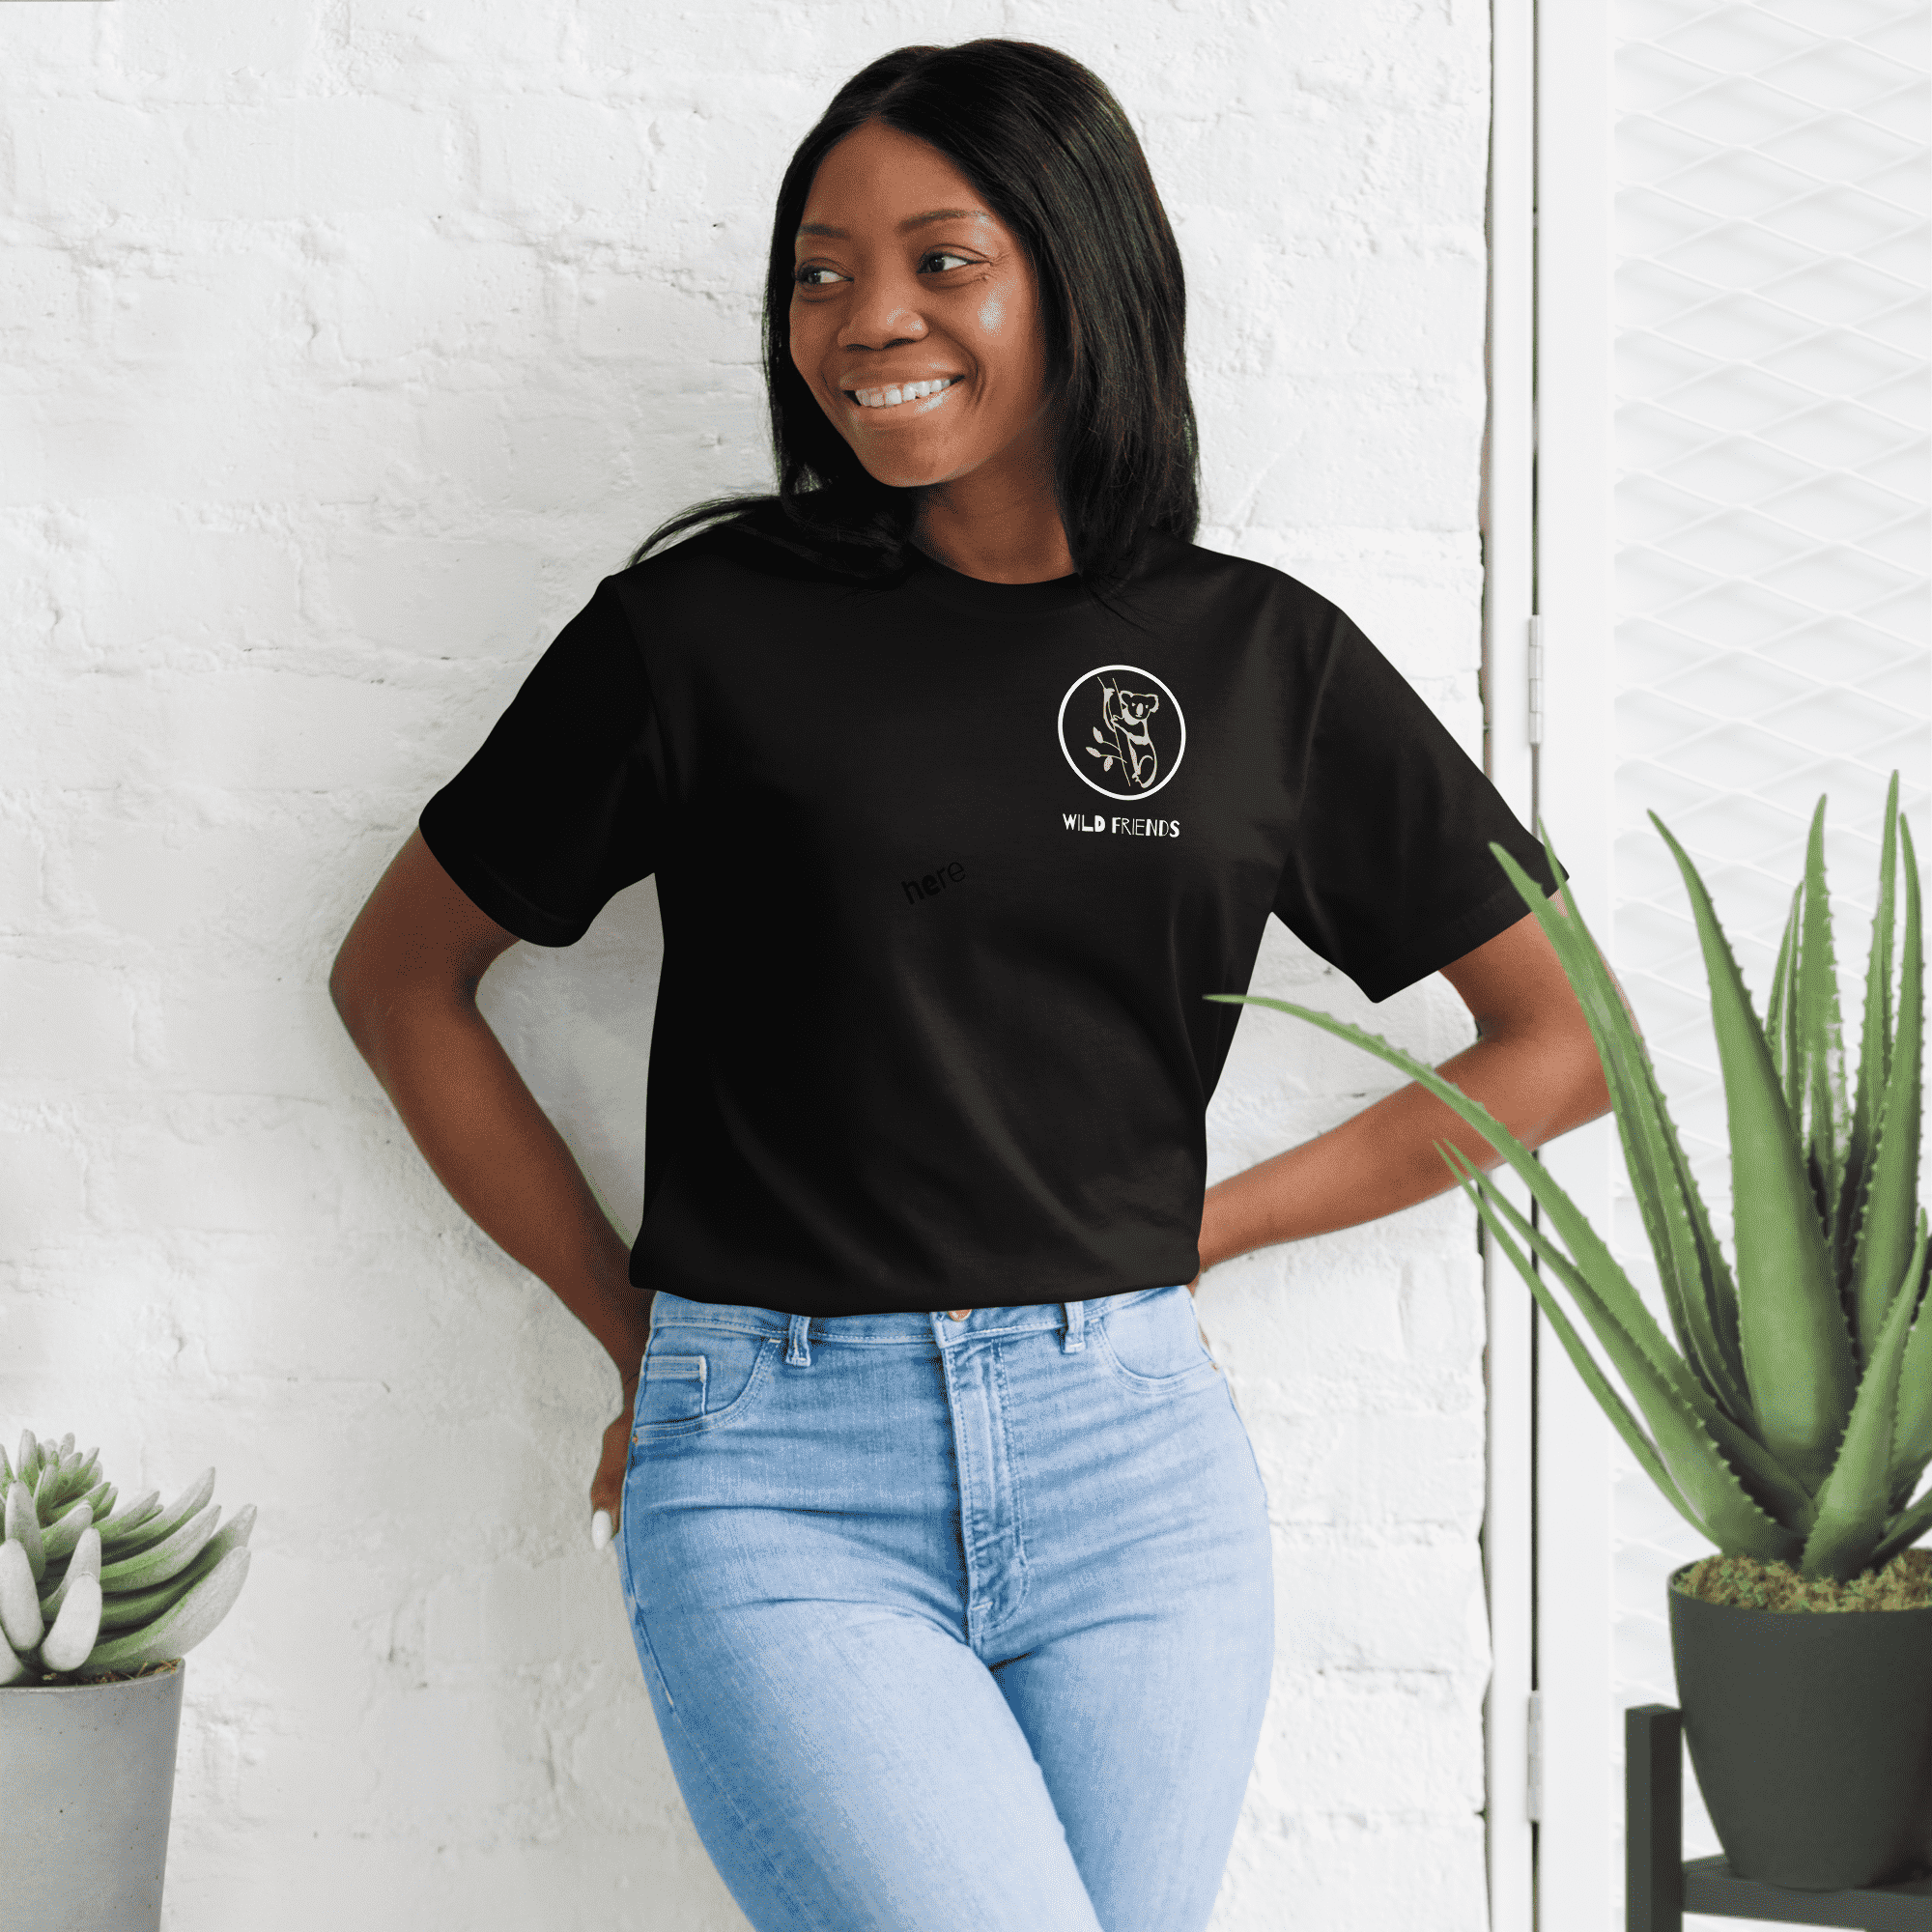 Organic Black Cotton Tee - Revive Wear     Organic Black Cotton T-Shirt.
This super soft, relaxed black tee is made of organic cotton, perfect for everyday wear or sports. Available in standard and plus sizes.